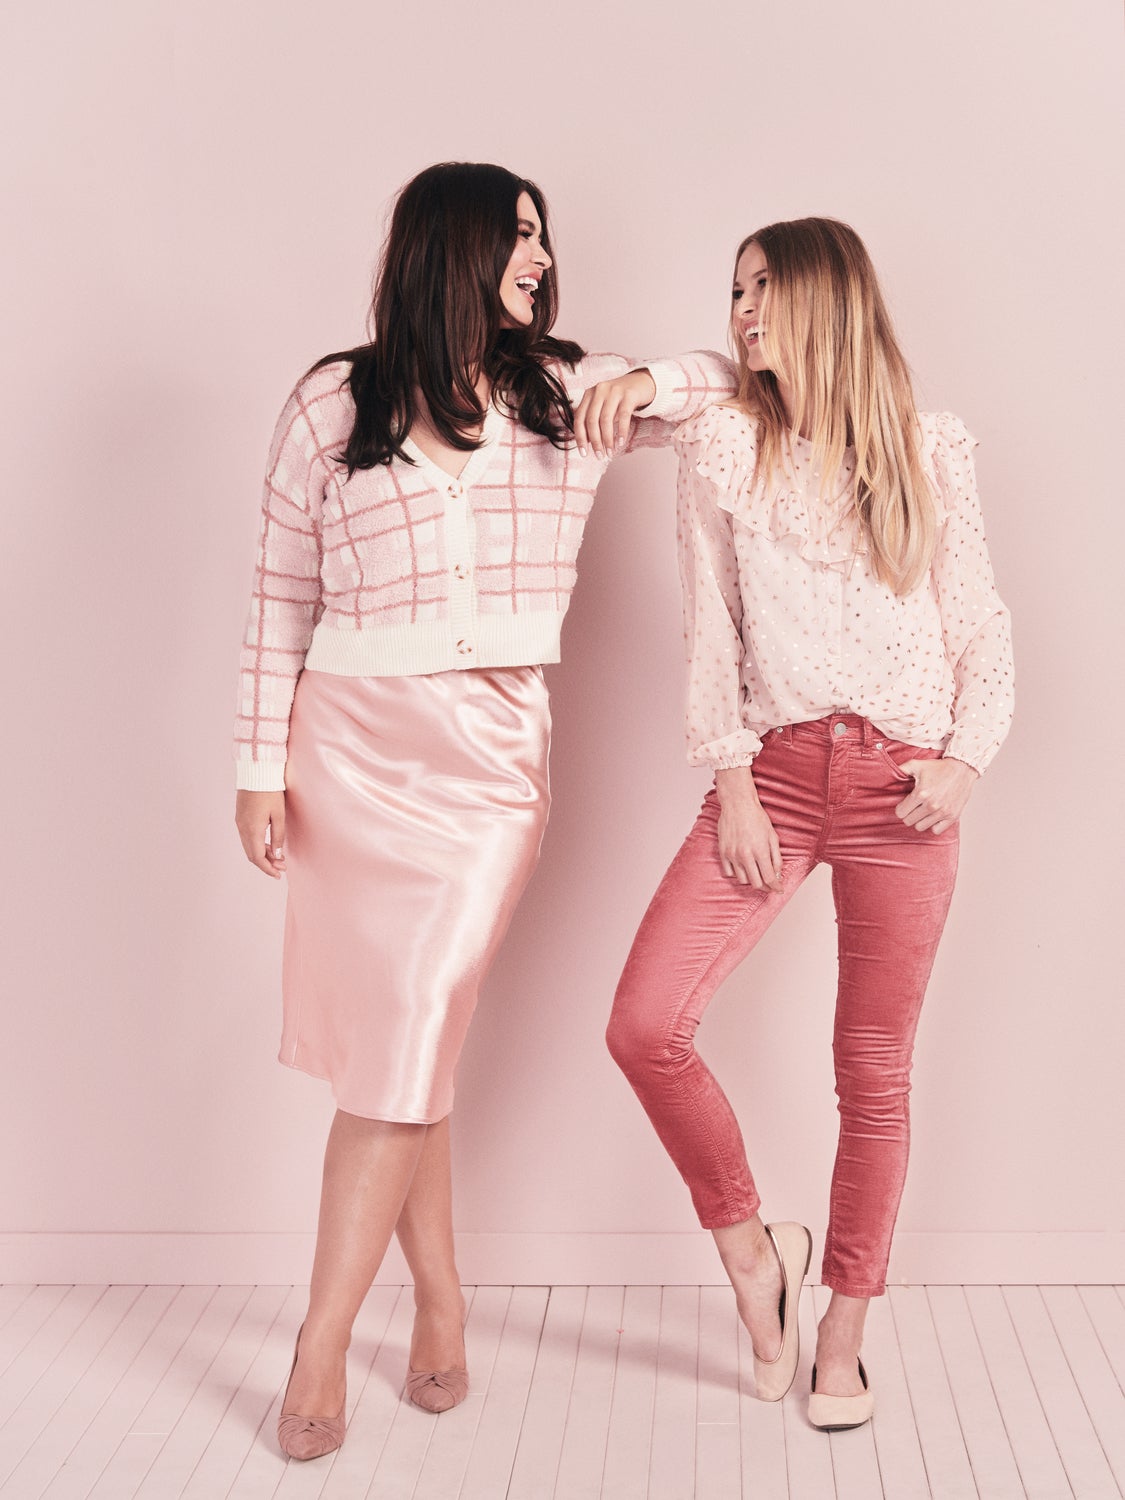 Brand Spotlight On LC Lauren Conrad From Kohl's - 50 IS NOT OLD - A Fashion  And Beauty Blog For Women Over 50